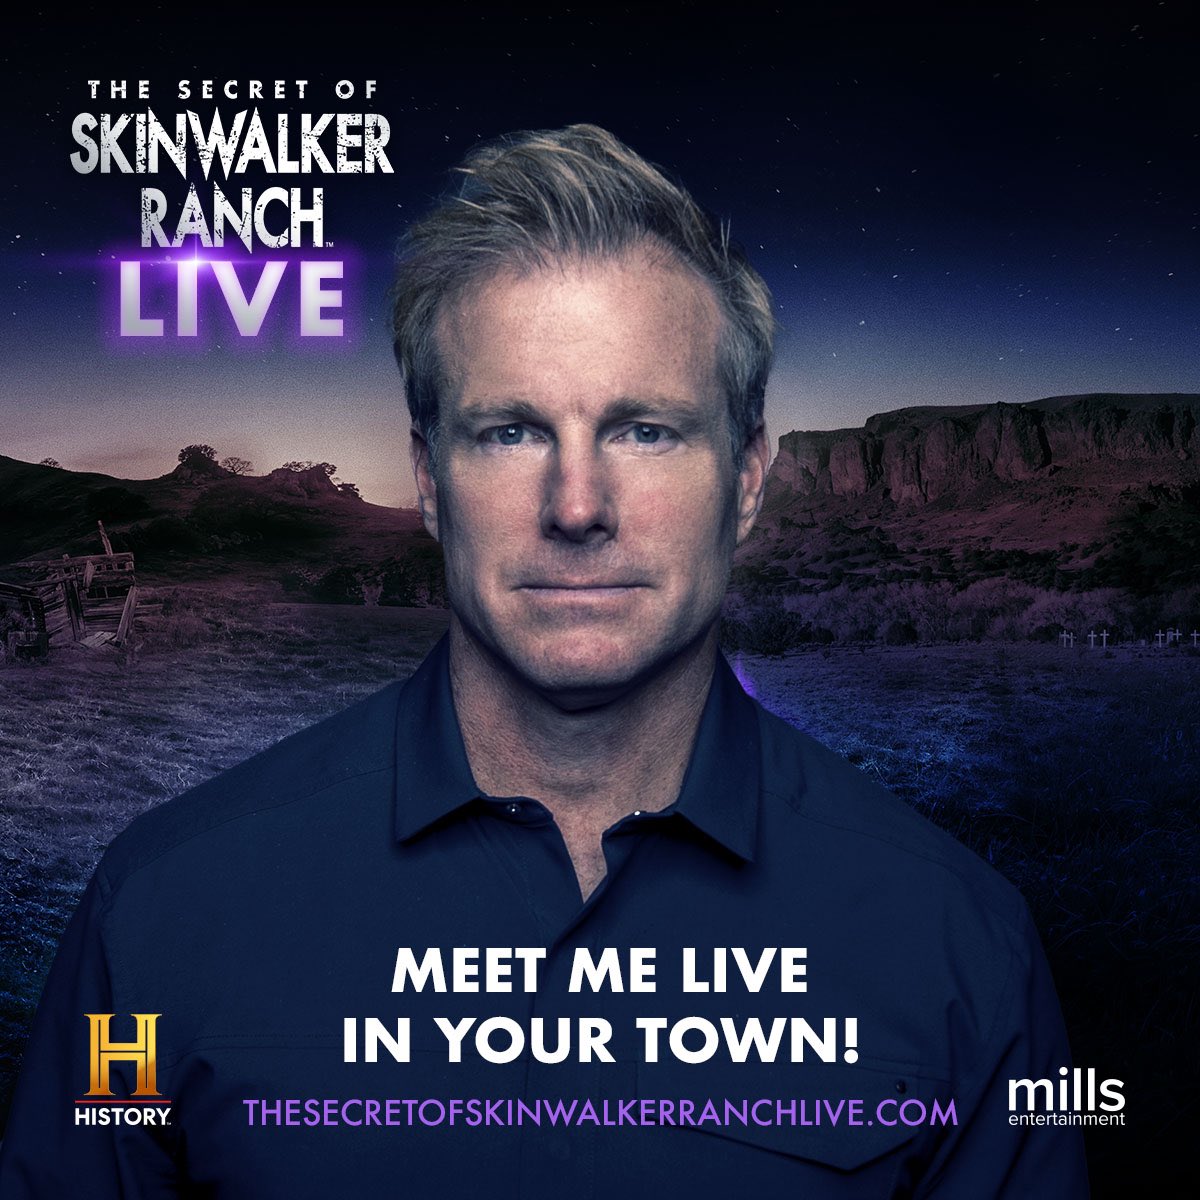 Would you like to be able to meet us one-on-one? The make sure you get your VIP tickets for The Secret of Skinwalker Ranch Live Tour. thesecretofskinwalkerranchlive.com